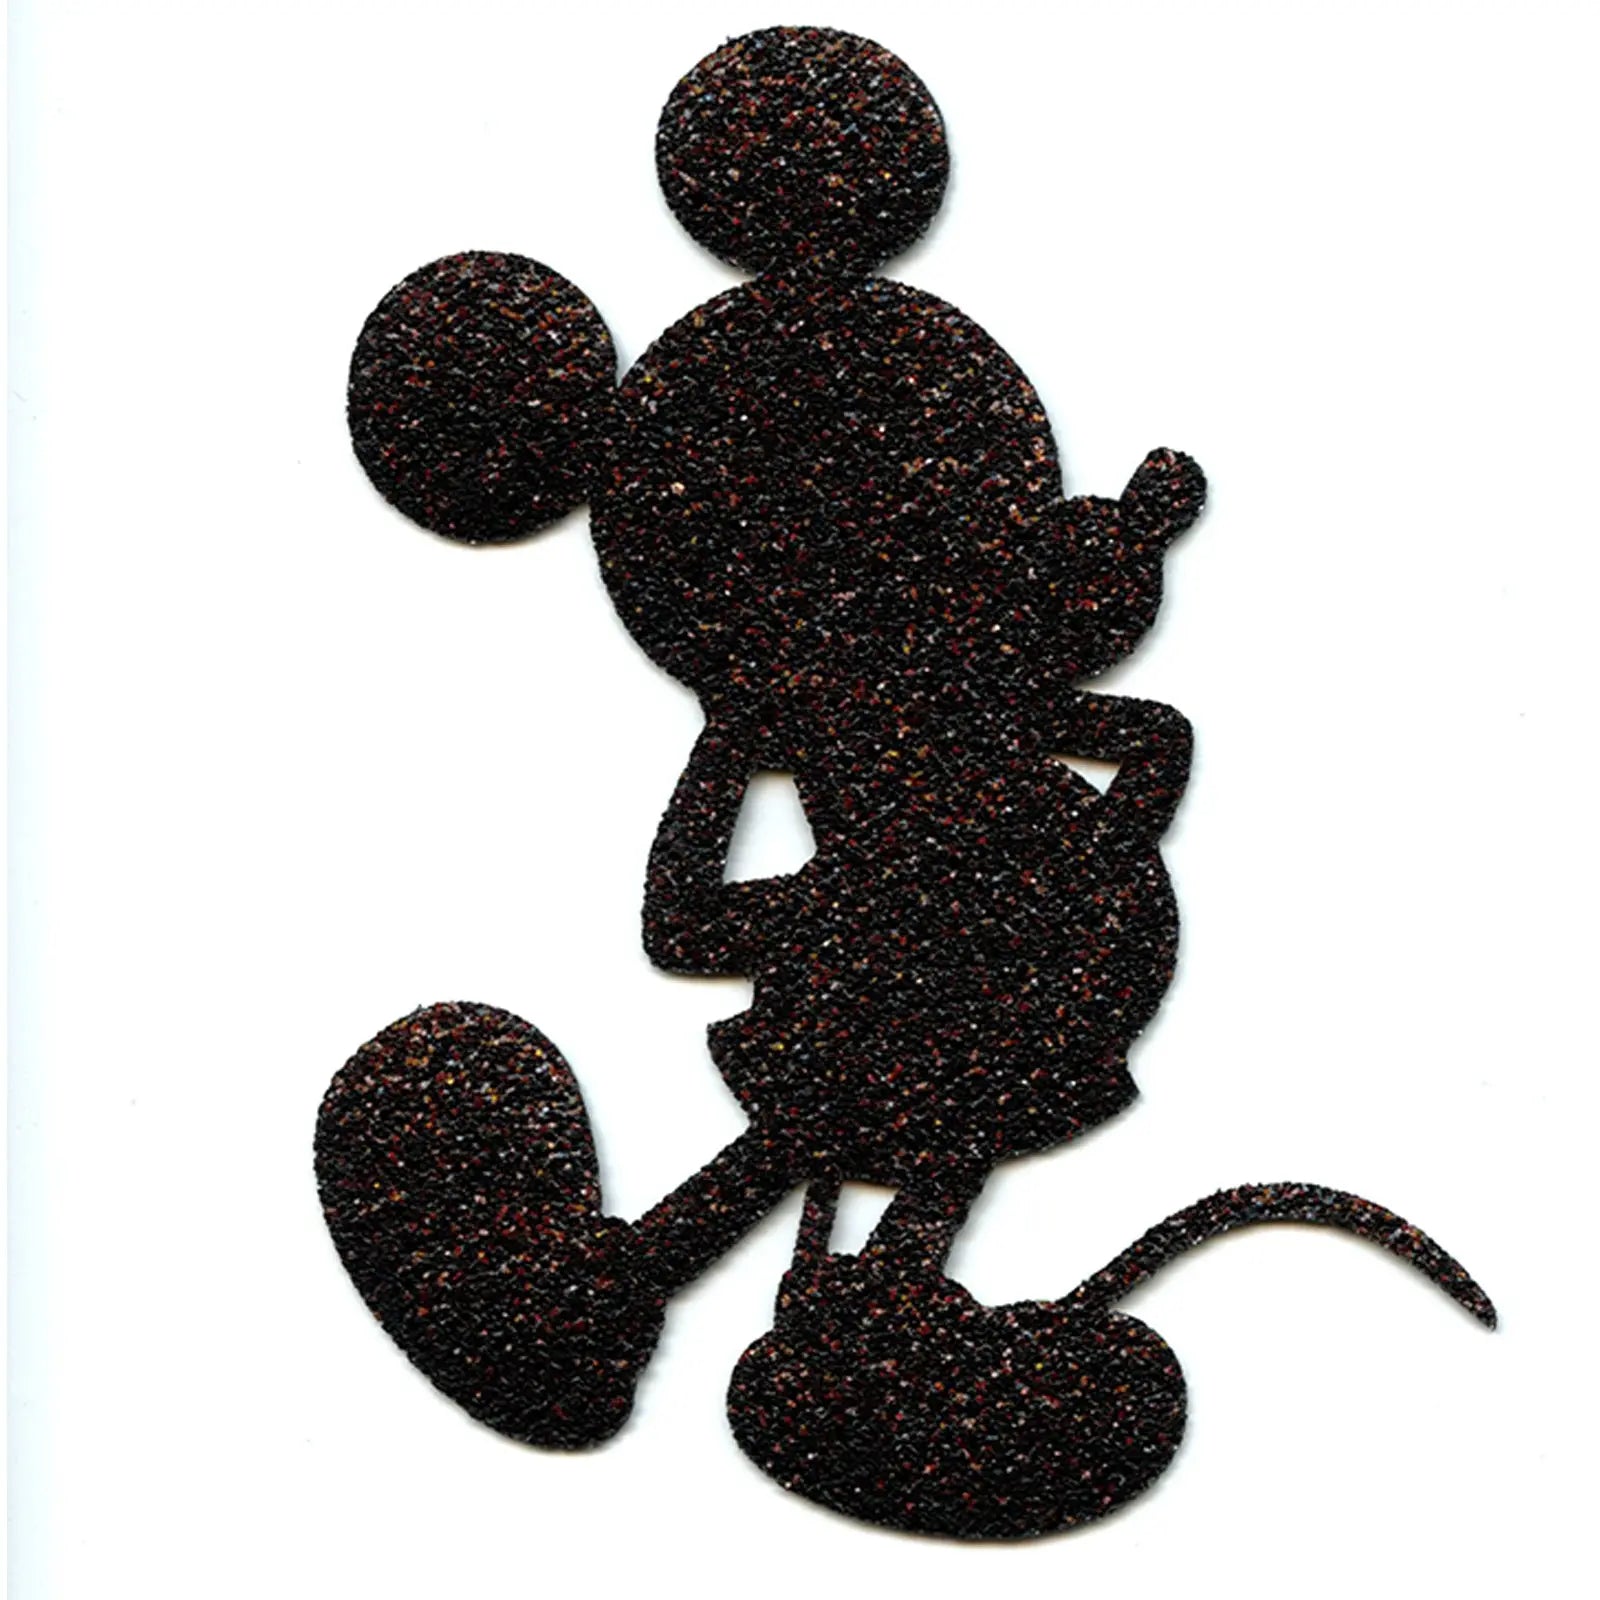 Disney Mickey Mouse Shiny Icon Embroidery Applique Patches For